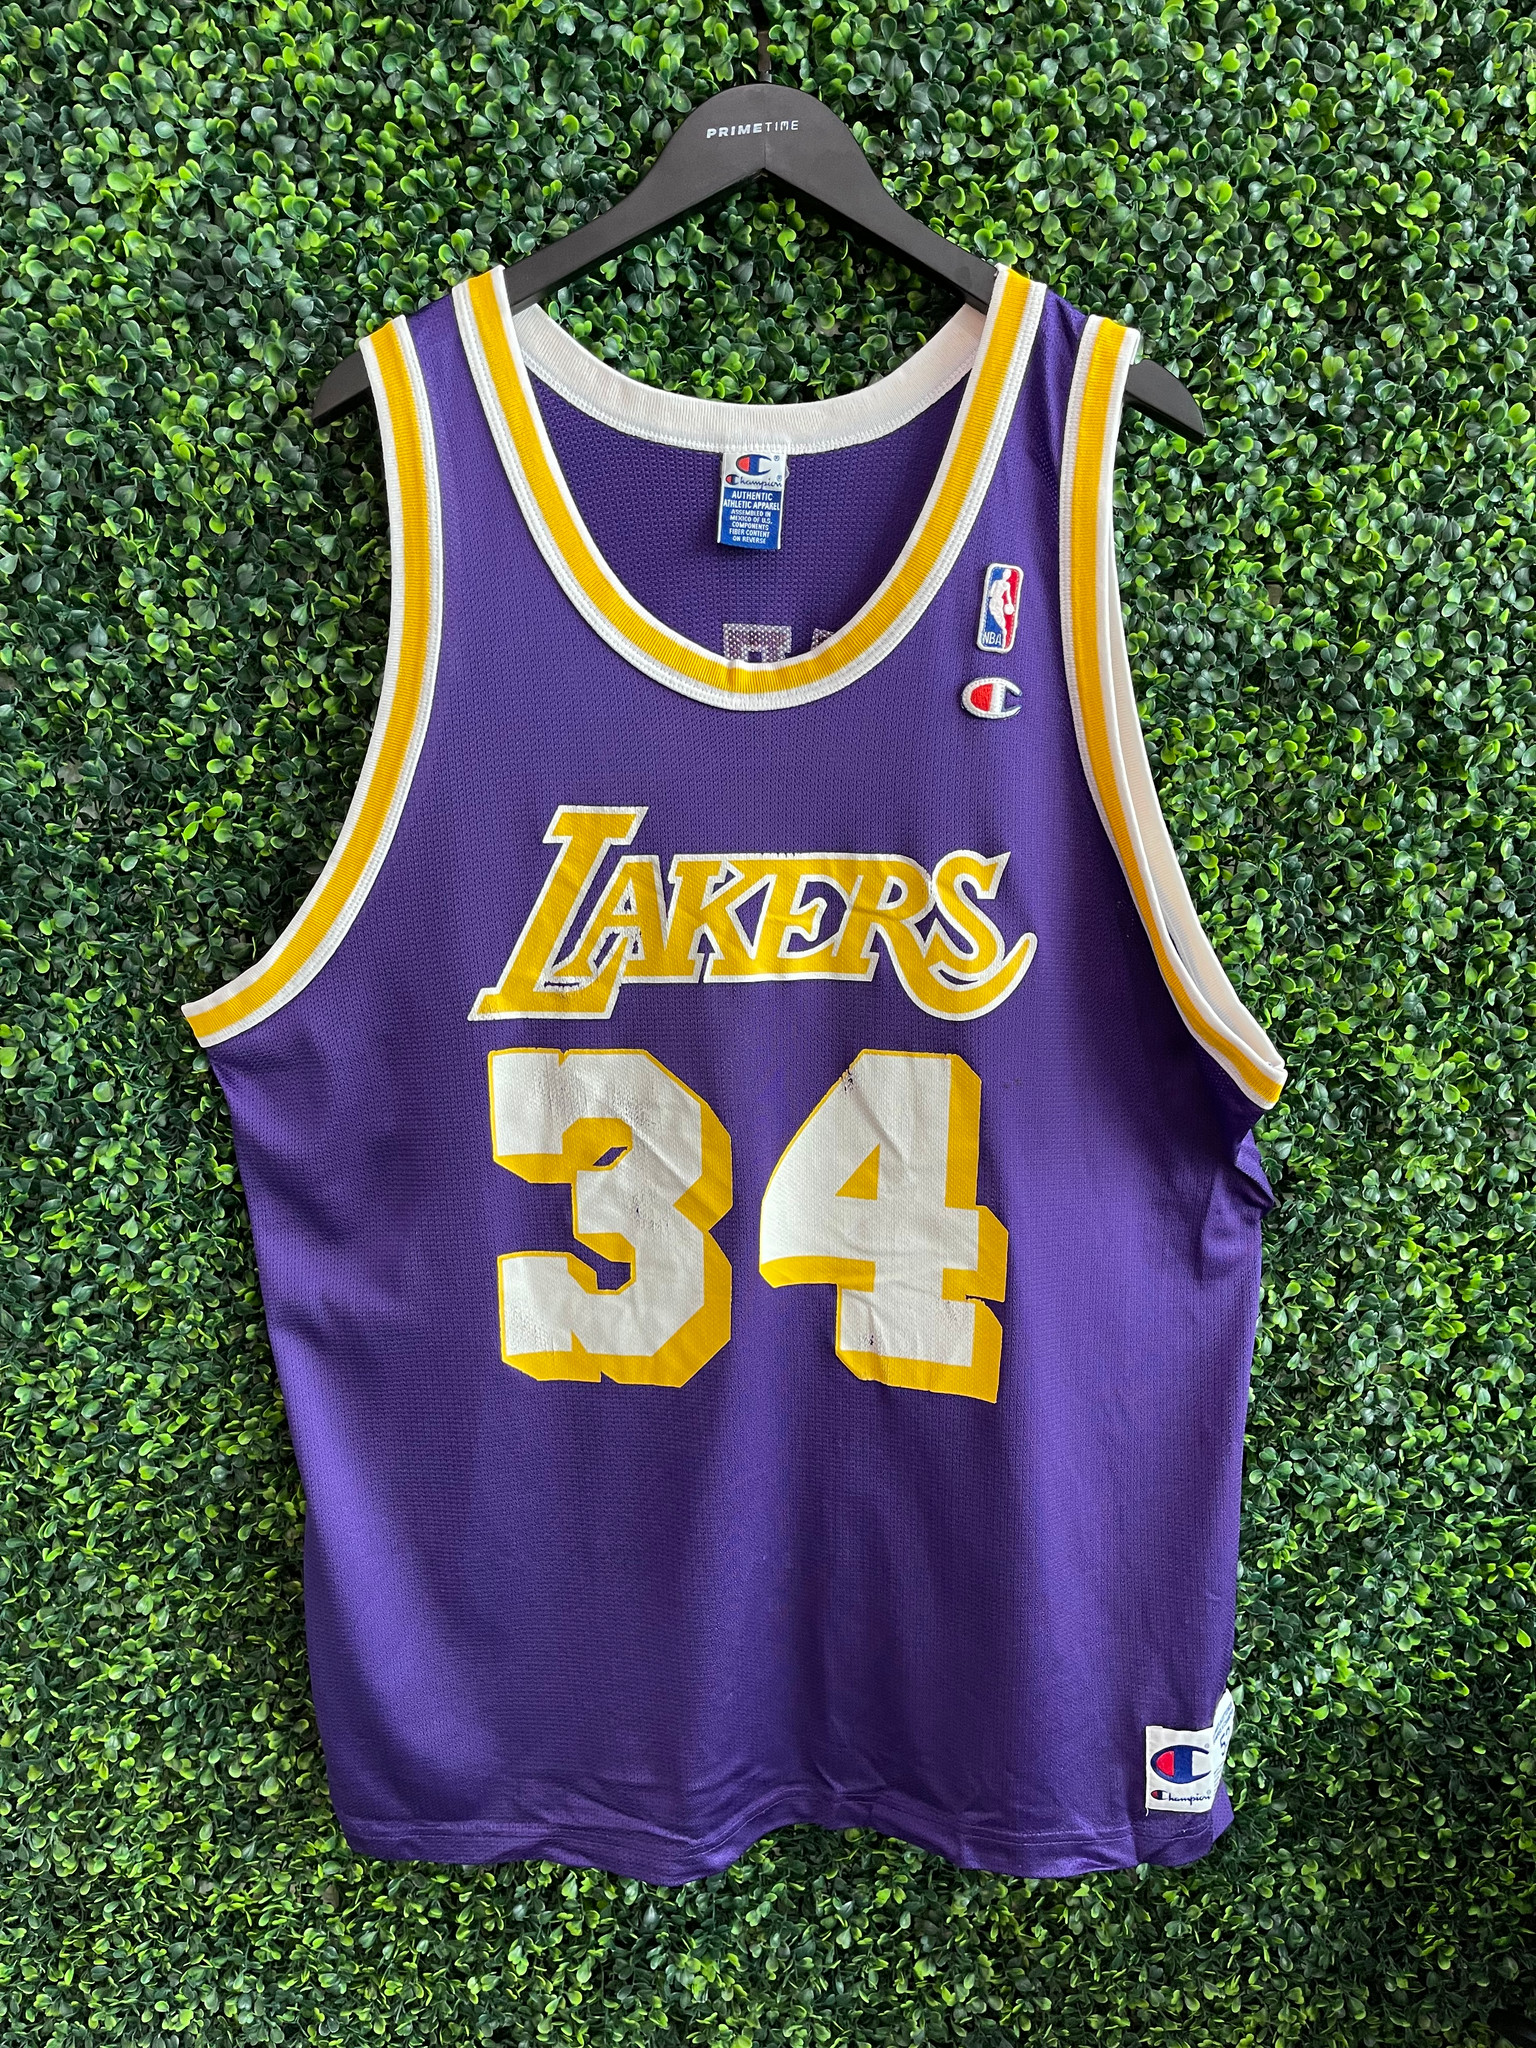 Vintage NBA Shaquille O'neal Purple Champion Lakers Jersey Number